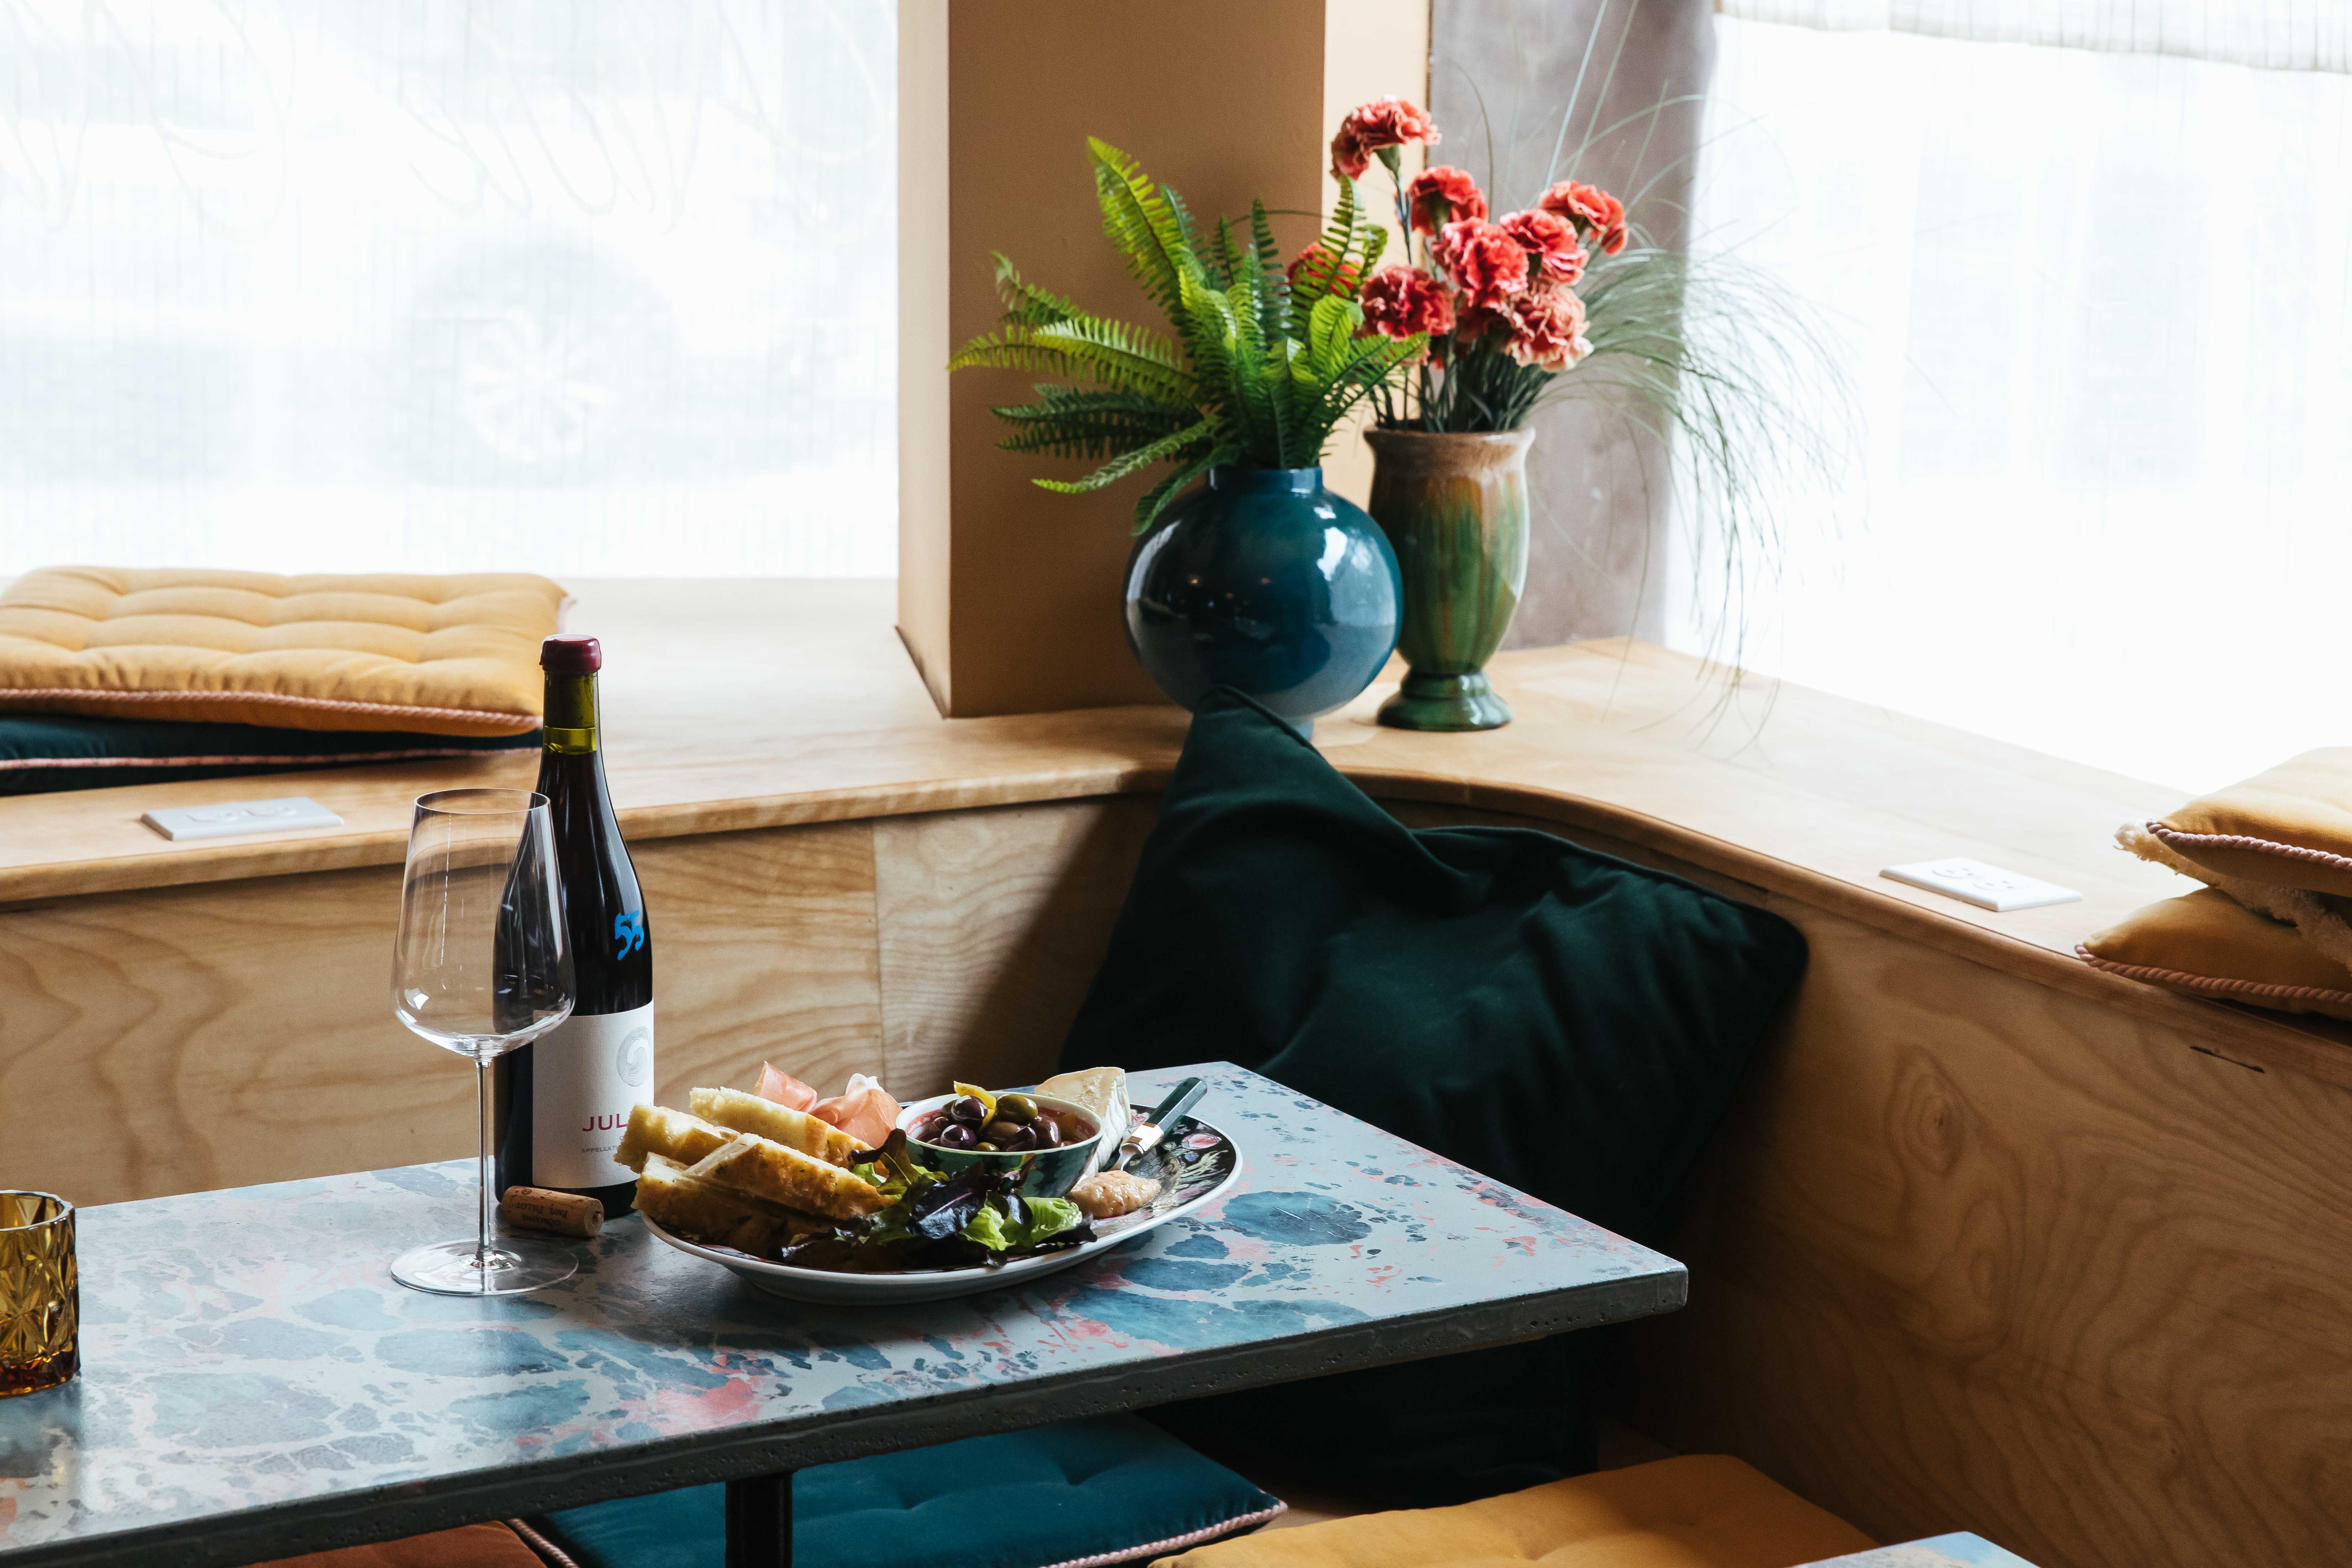 A plate of food and a bottle of wine sit on a blue table at Niche Niche.